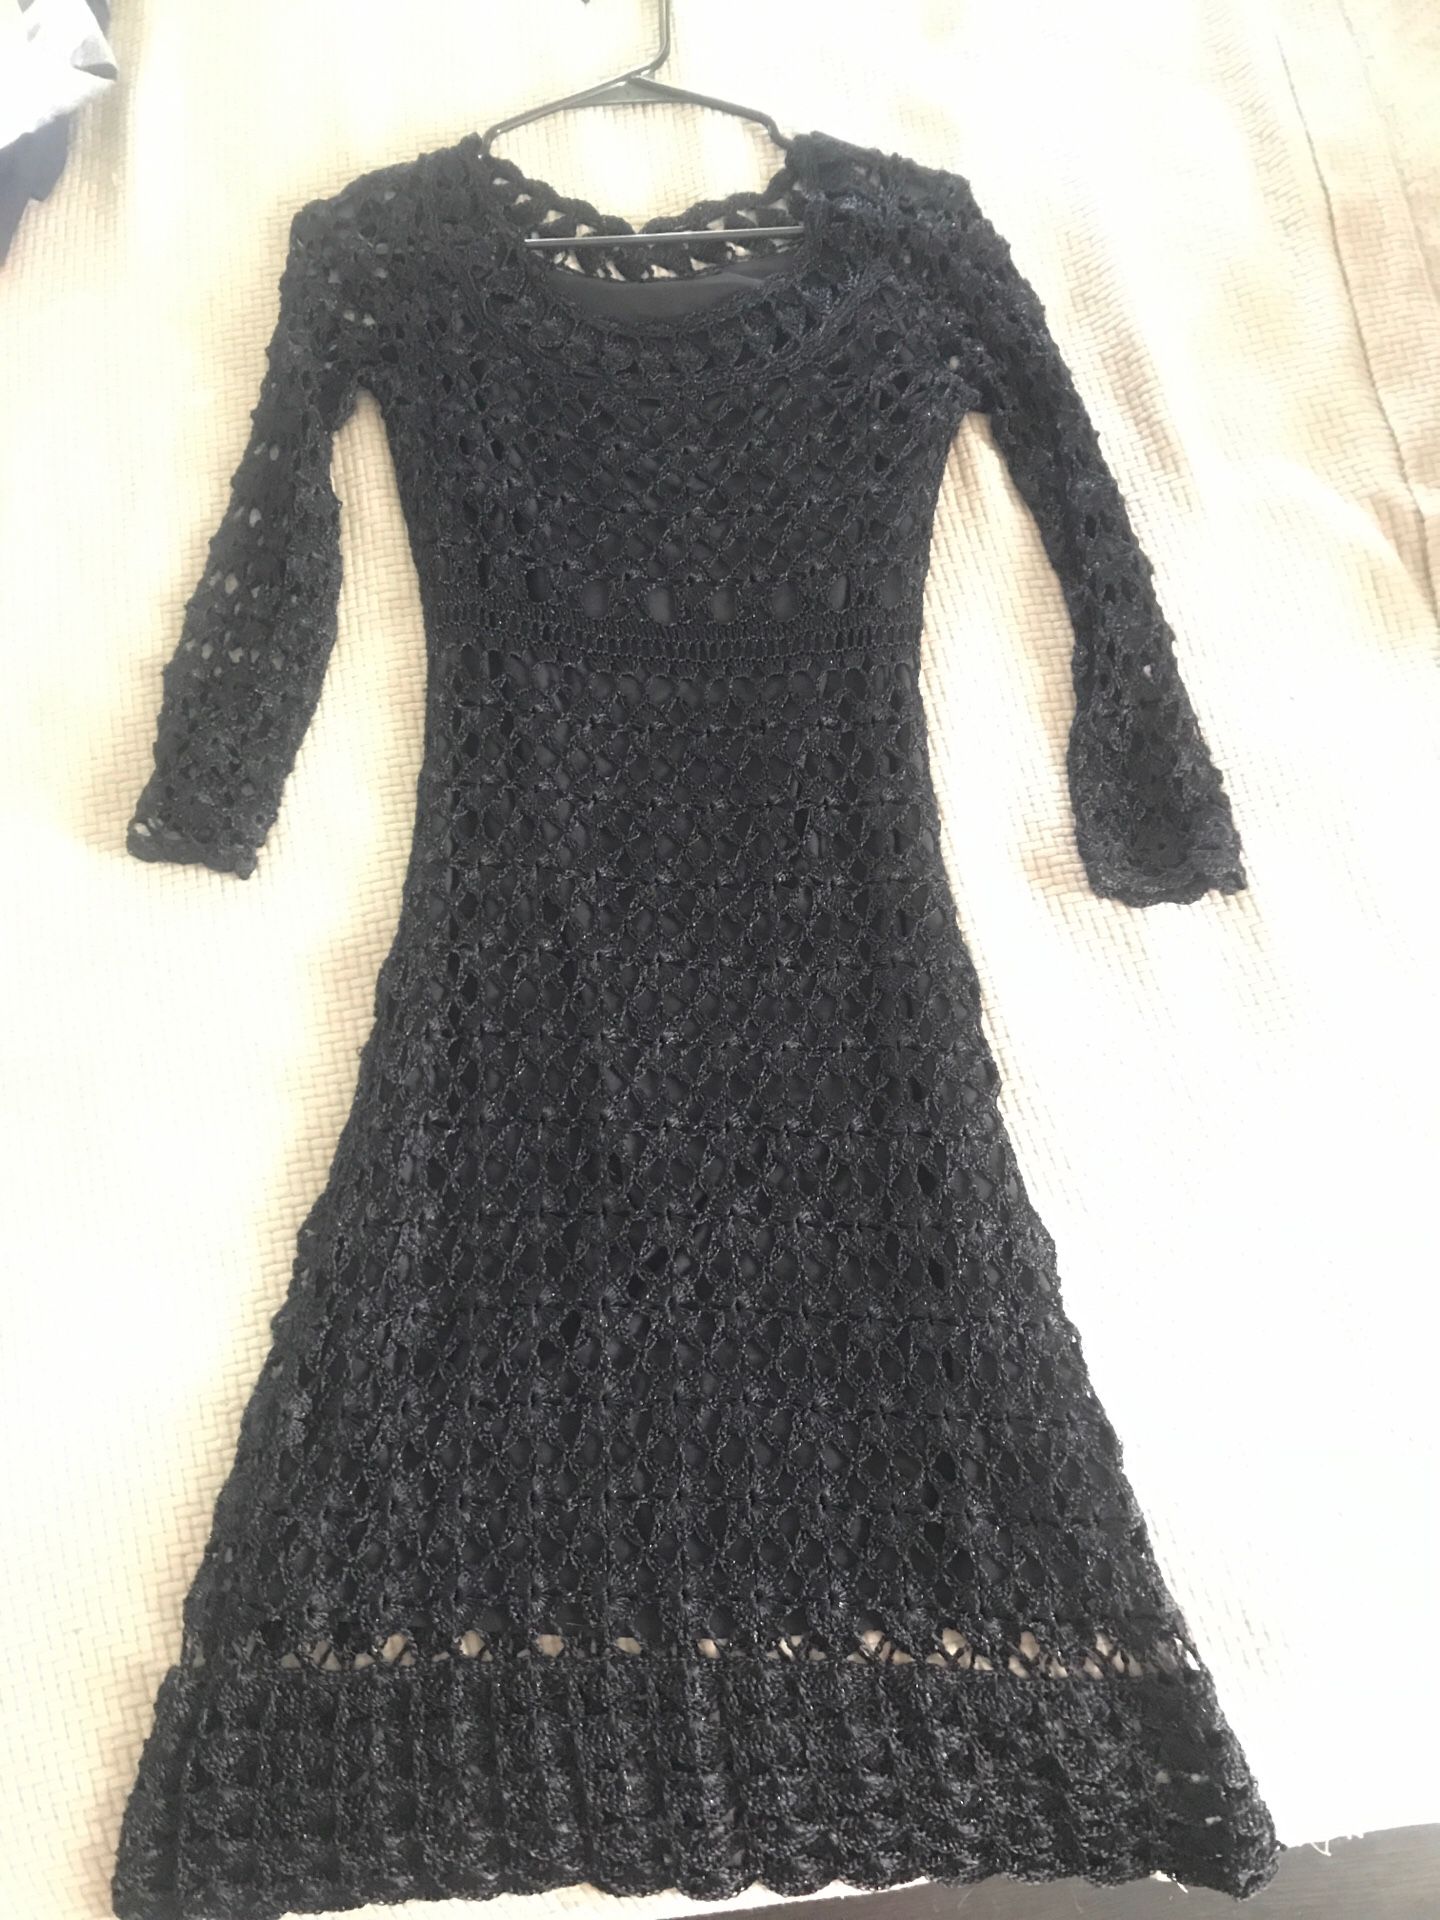 Black lace cocktail dress. Ladies size small, very gently used.